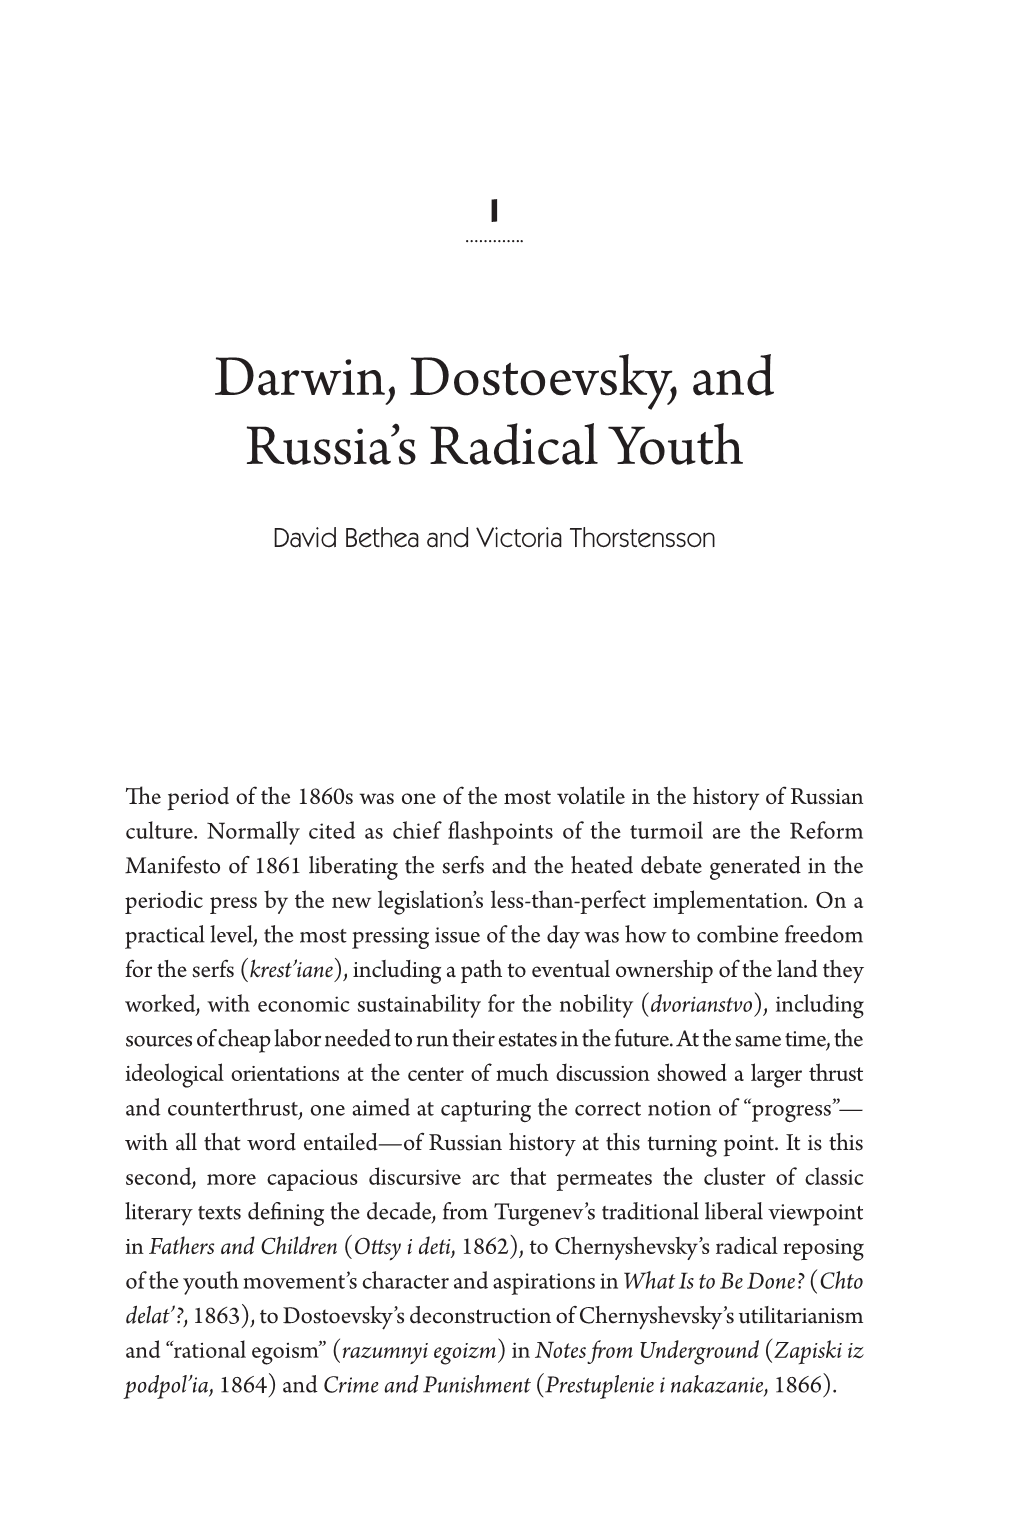 Darwin, Dostoevsky, and Russia's Radical Youth